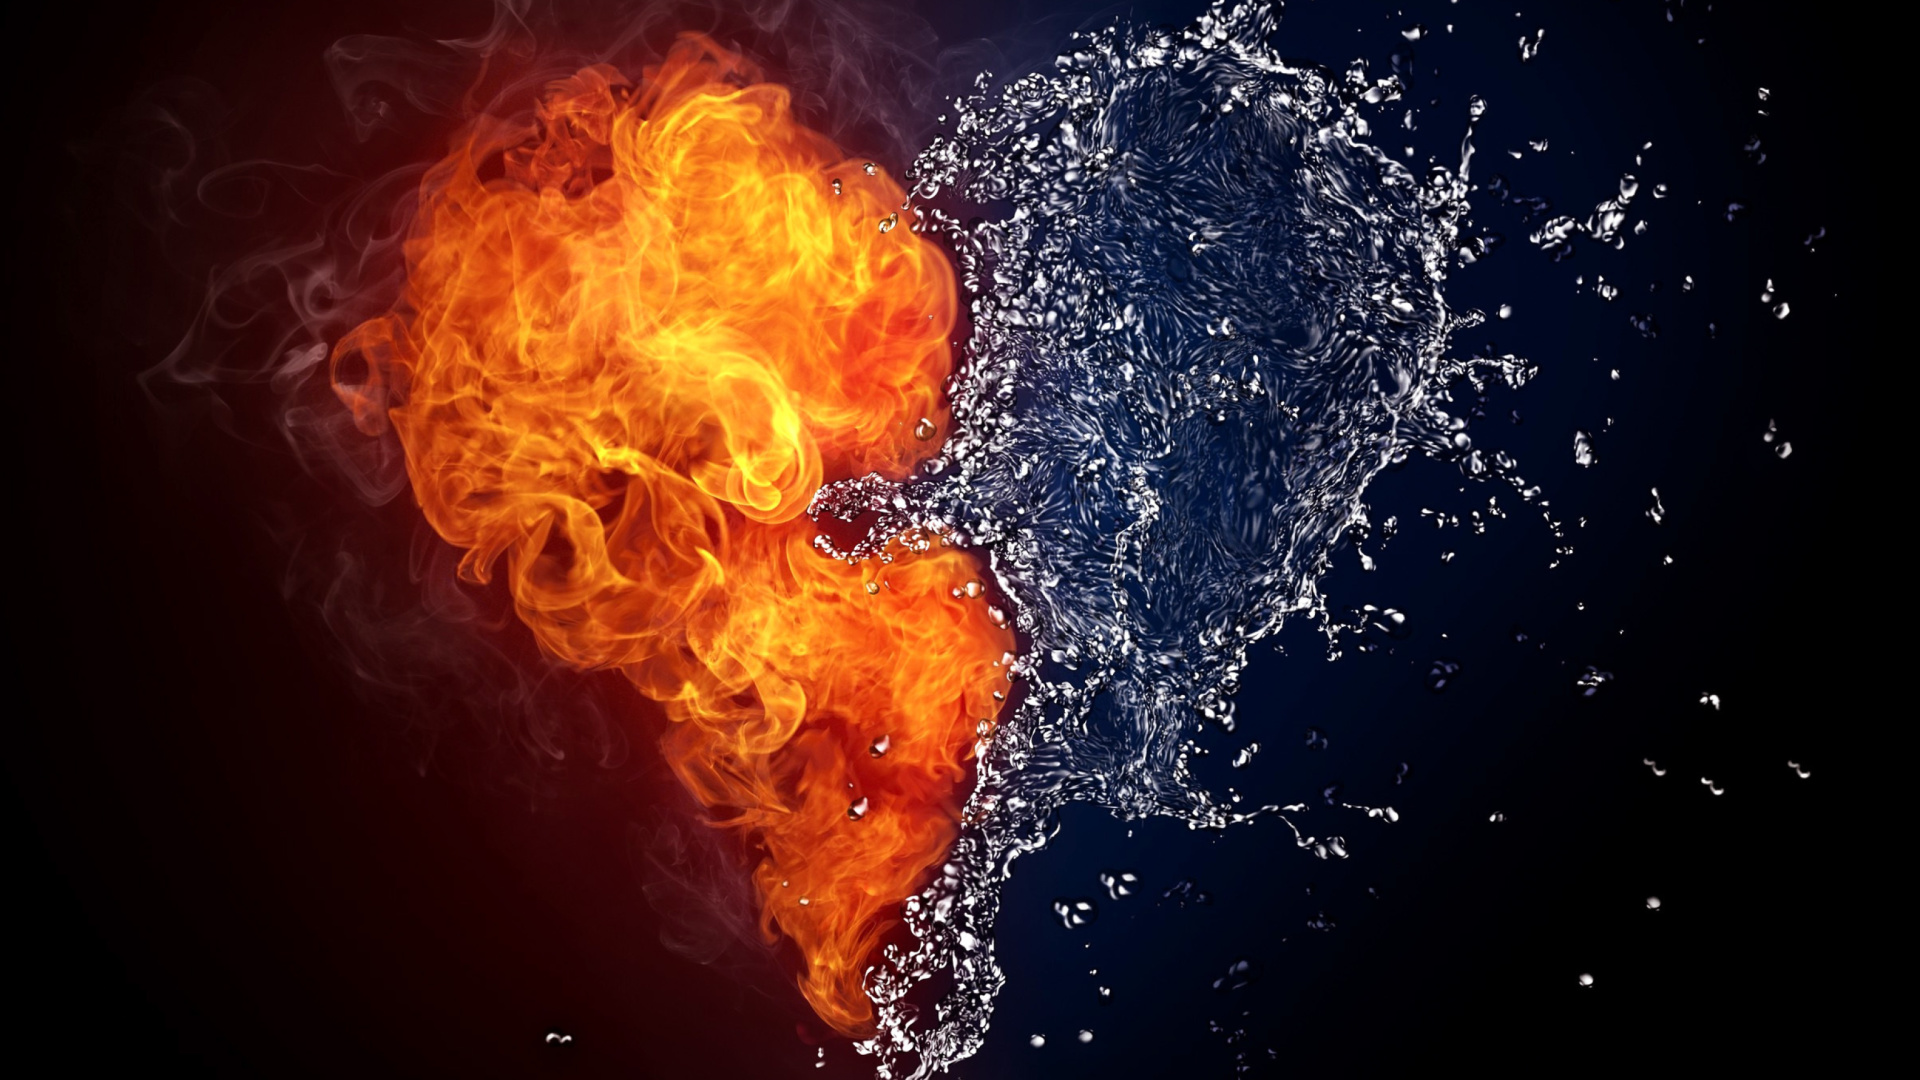 Water and Fire Heart wallpaper 1920x1080